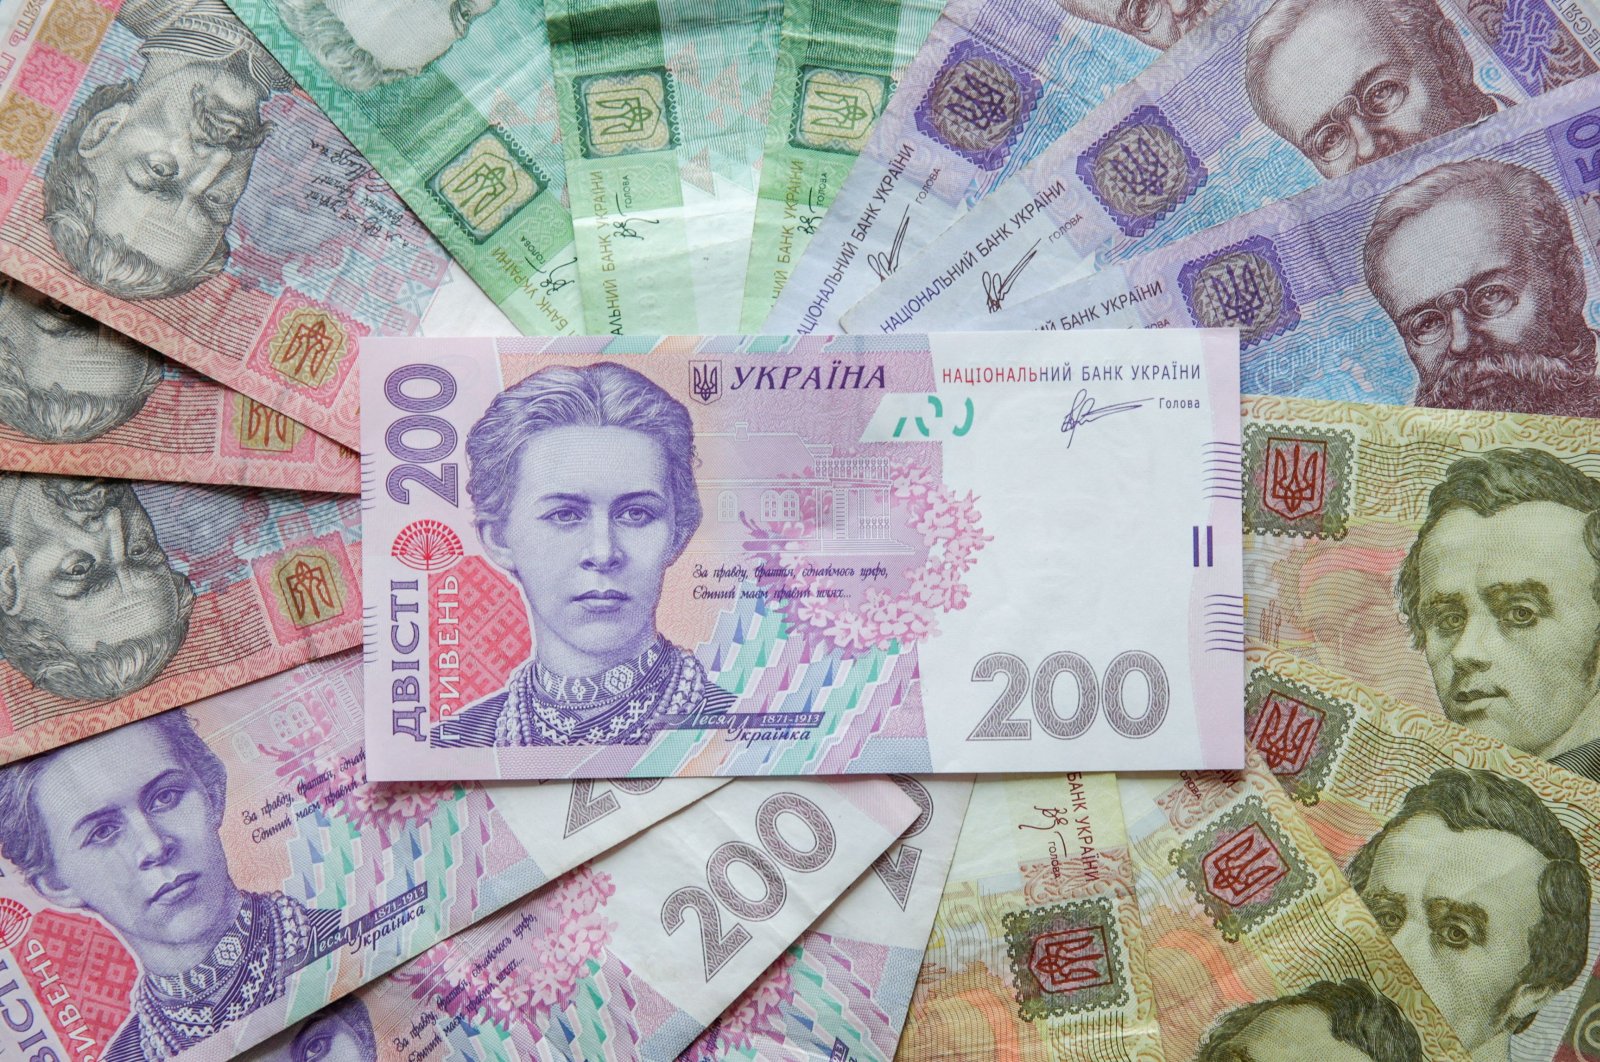 Ukrainian hryvnia banknotes are seen in a photo illustration shot in Kyiv, Ukraine, Aug. 6, 2014. (Reuters Photo)